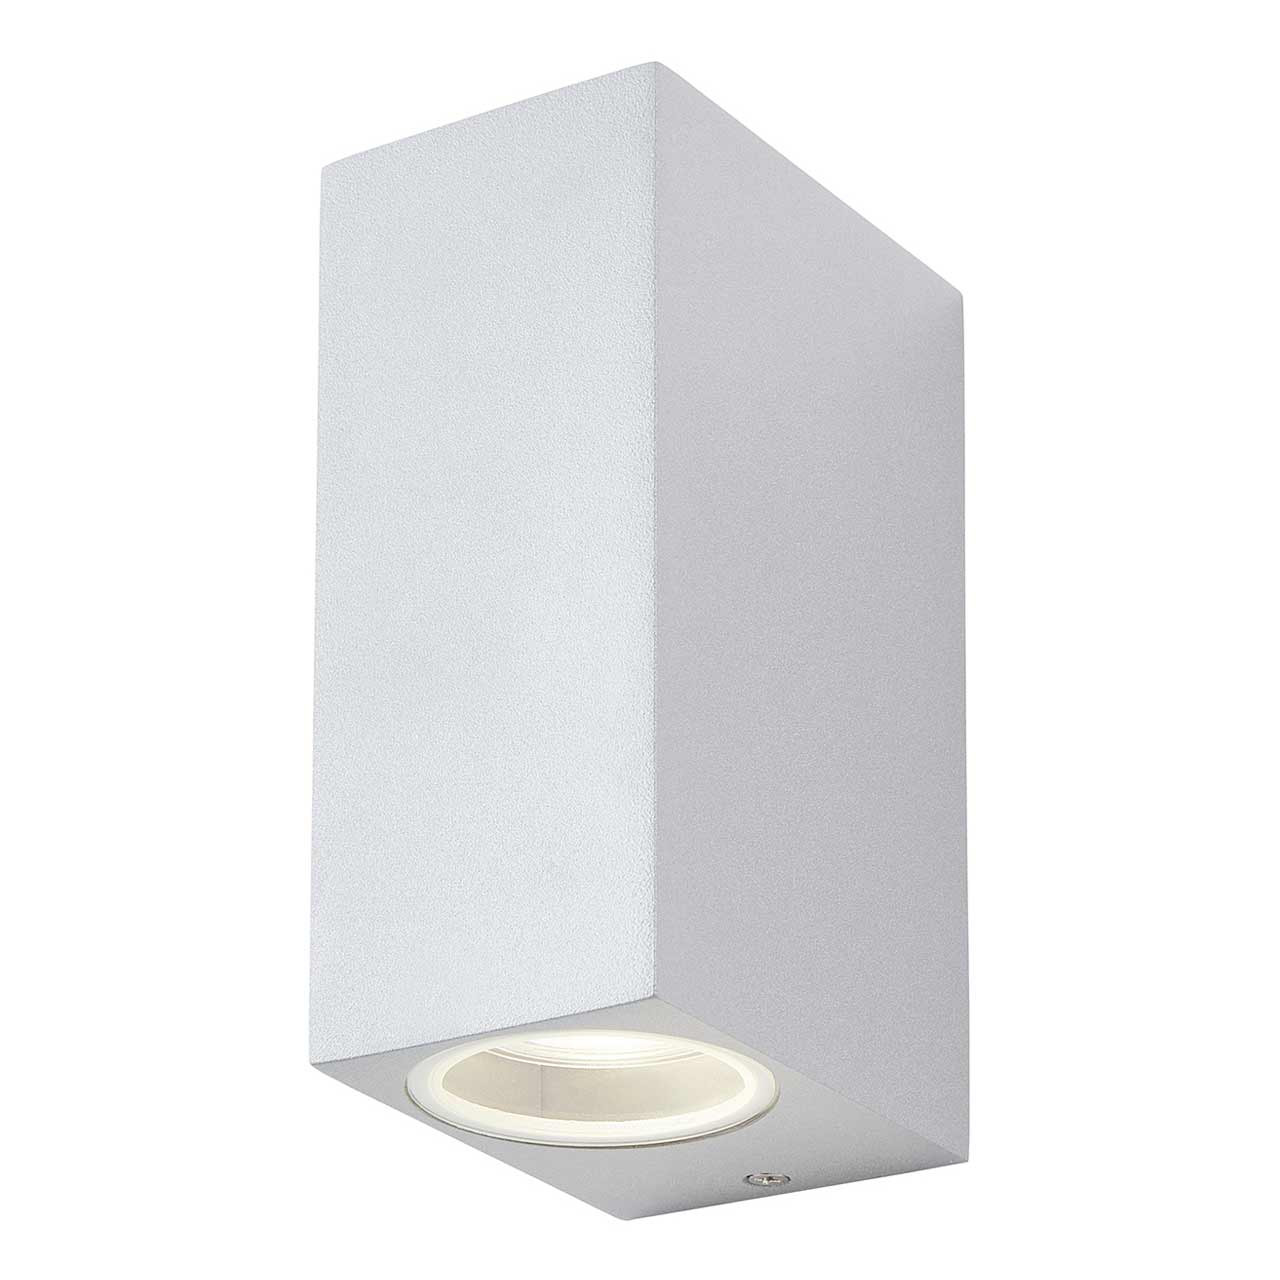 Zink FLEET Square Outdoor Up and Down Wall Light Silver